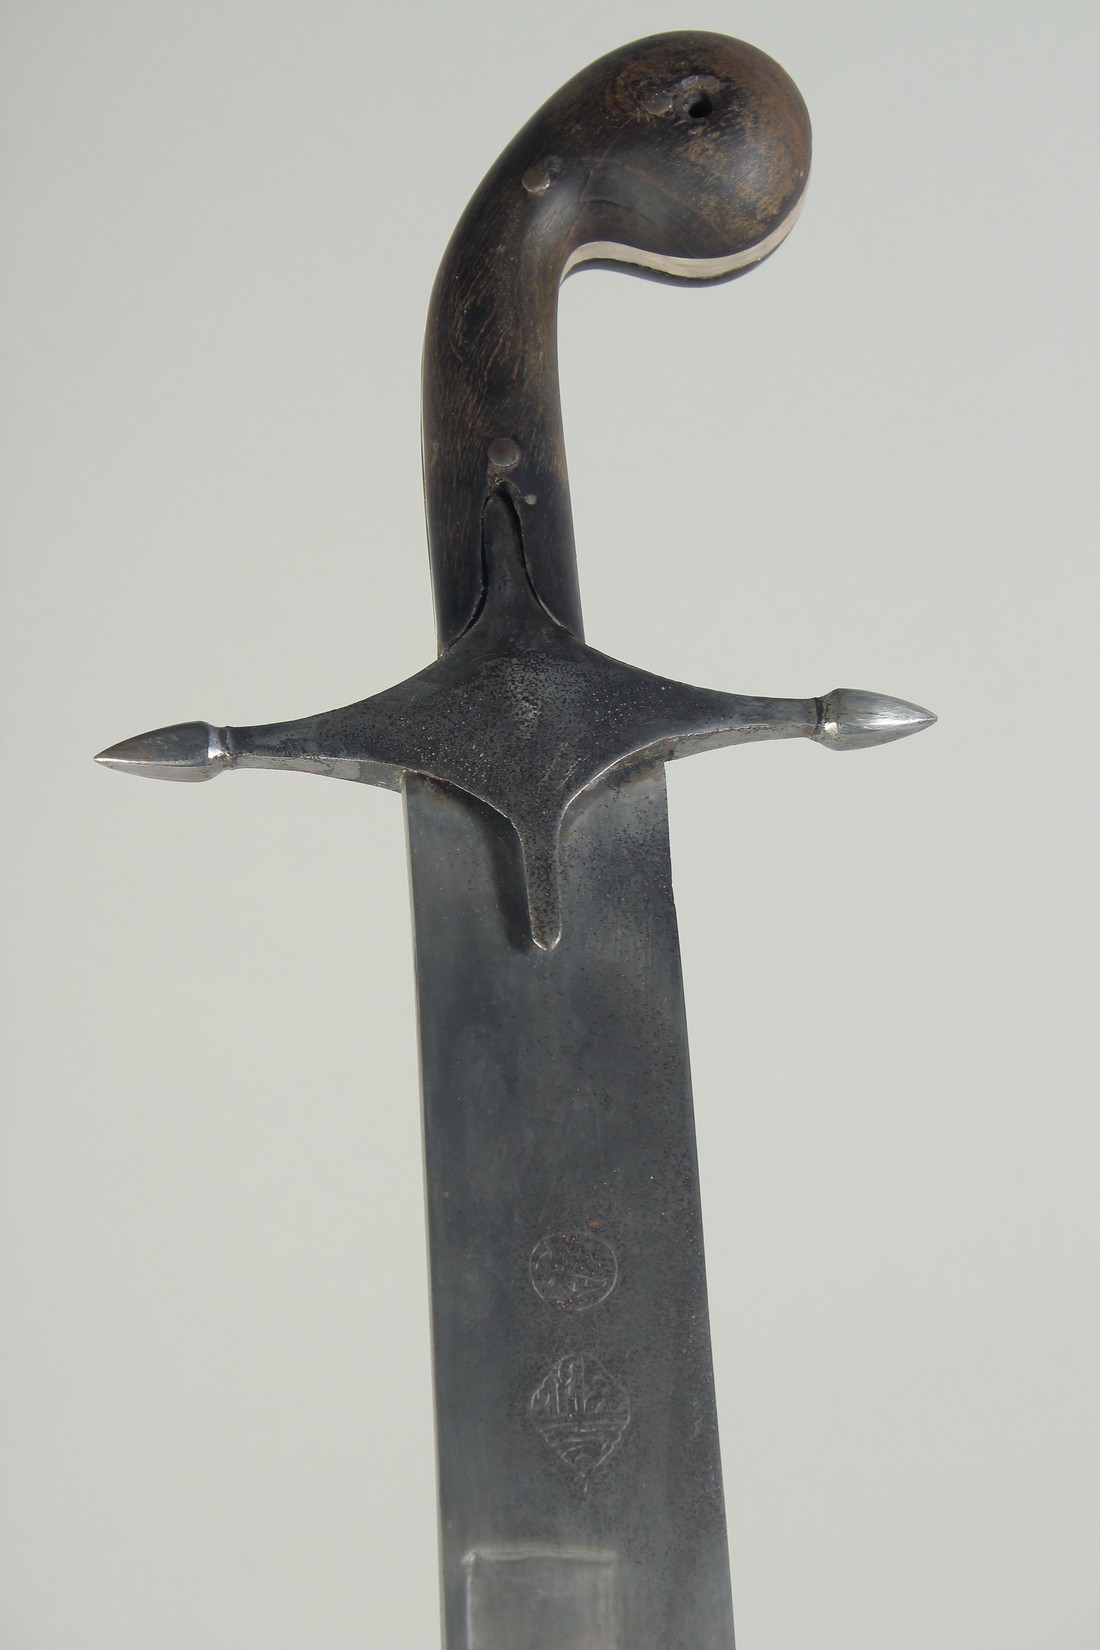 A FINE LARGE EARLY 19TH CENTURY ISLAMIC OTTOMAN TURKISH KILIJ SWORD, with engraved calligraphic - Image 2 of 6